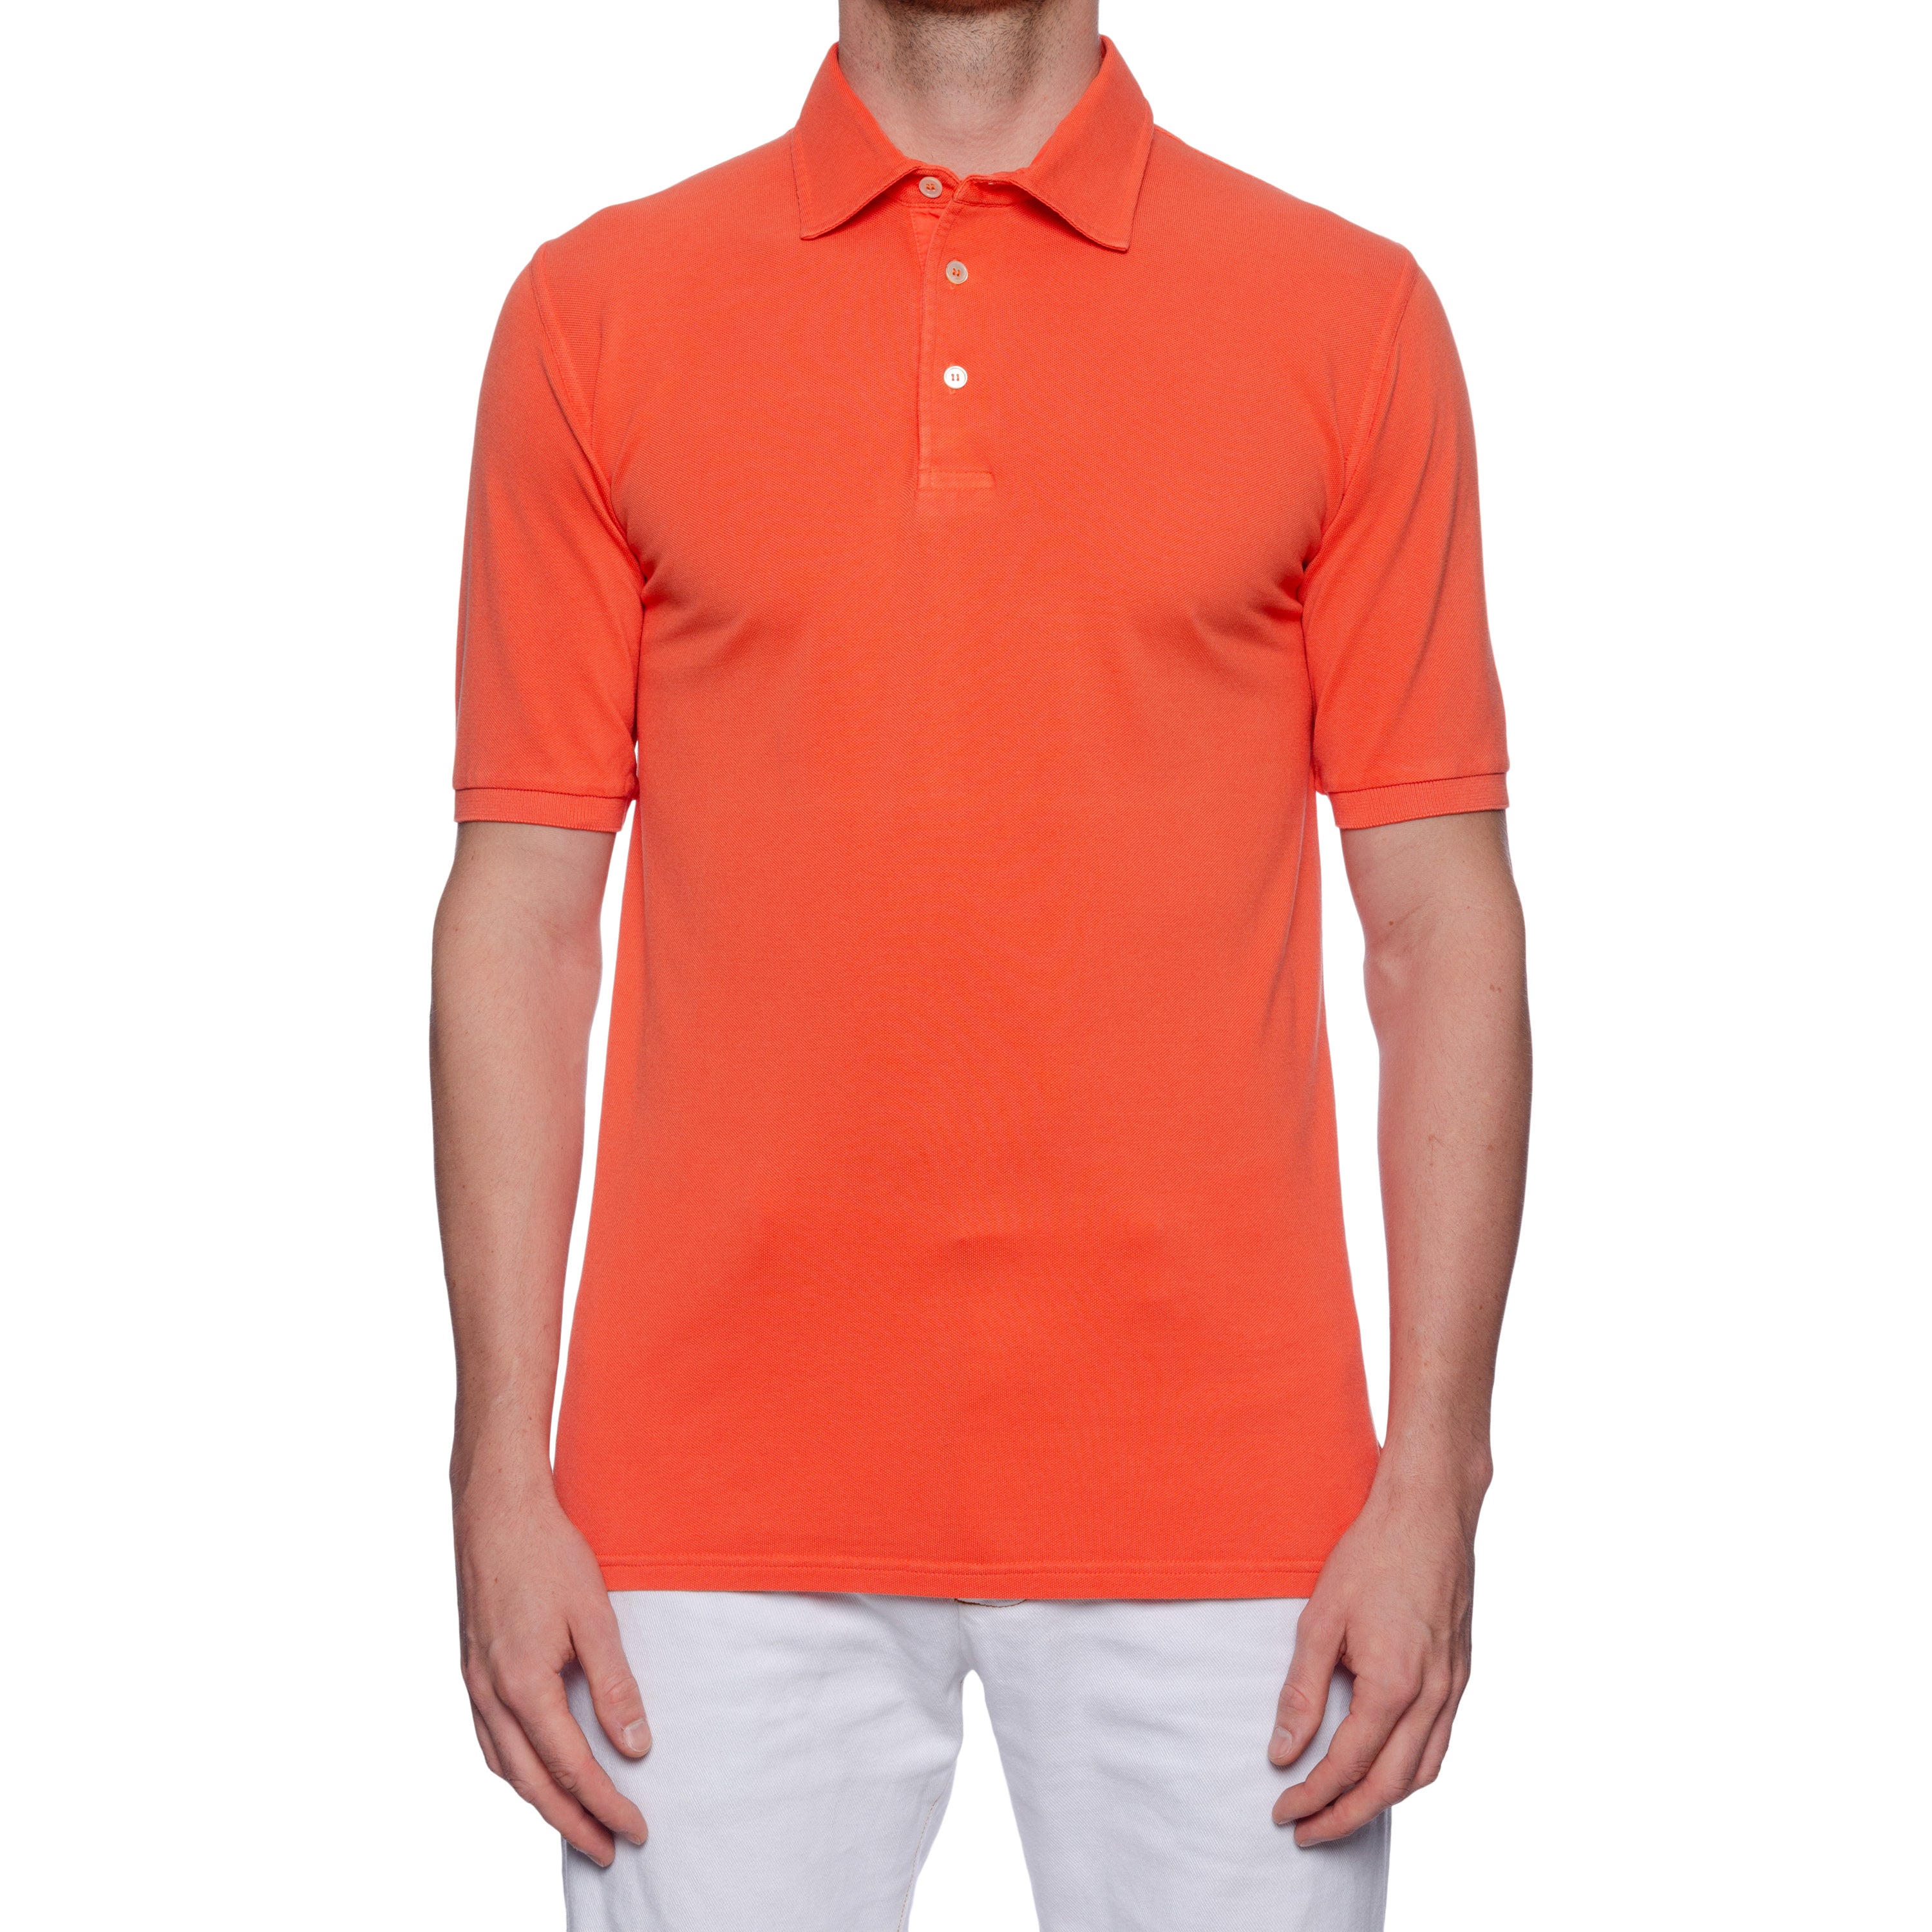 FEDELI "North" Coral Cotton Pique Frosted Short Sleeve Polo Shirt EU 50 NEW US M FEDELI